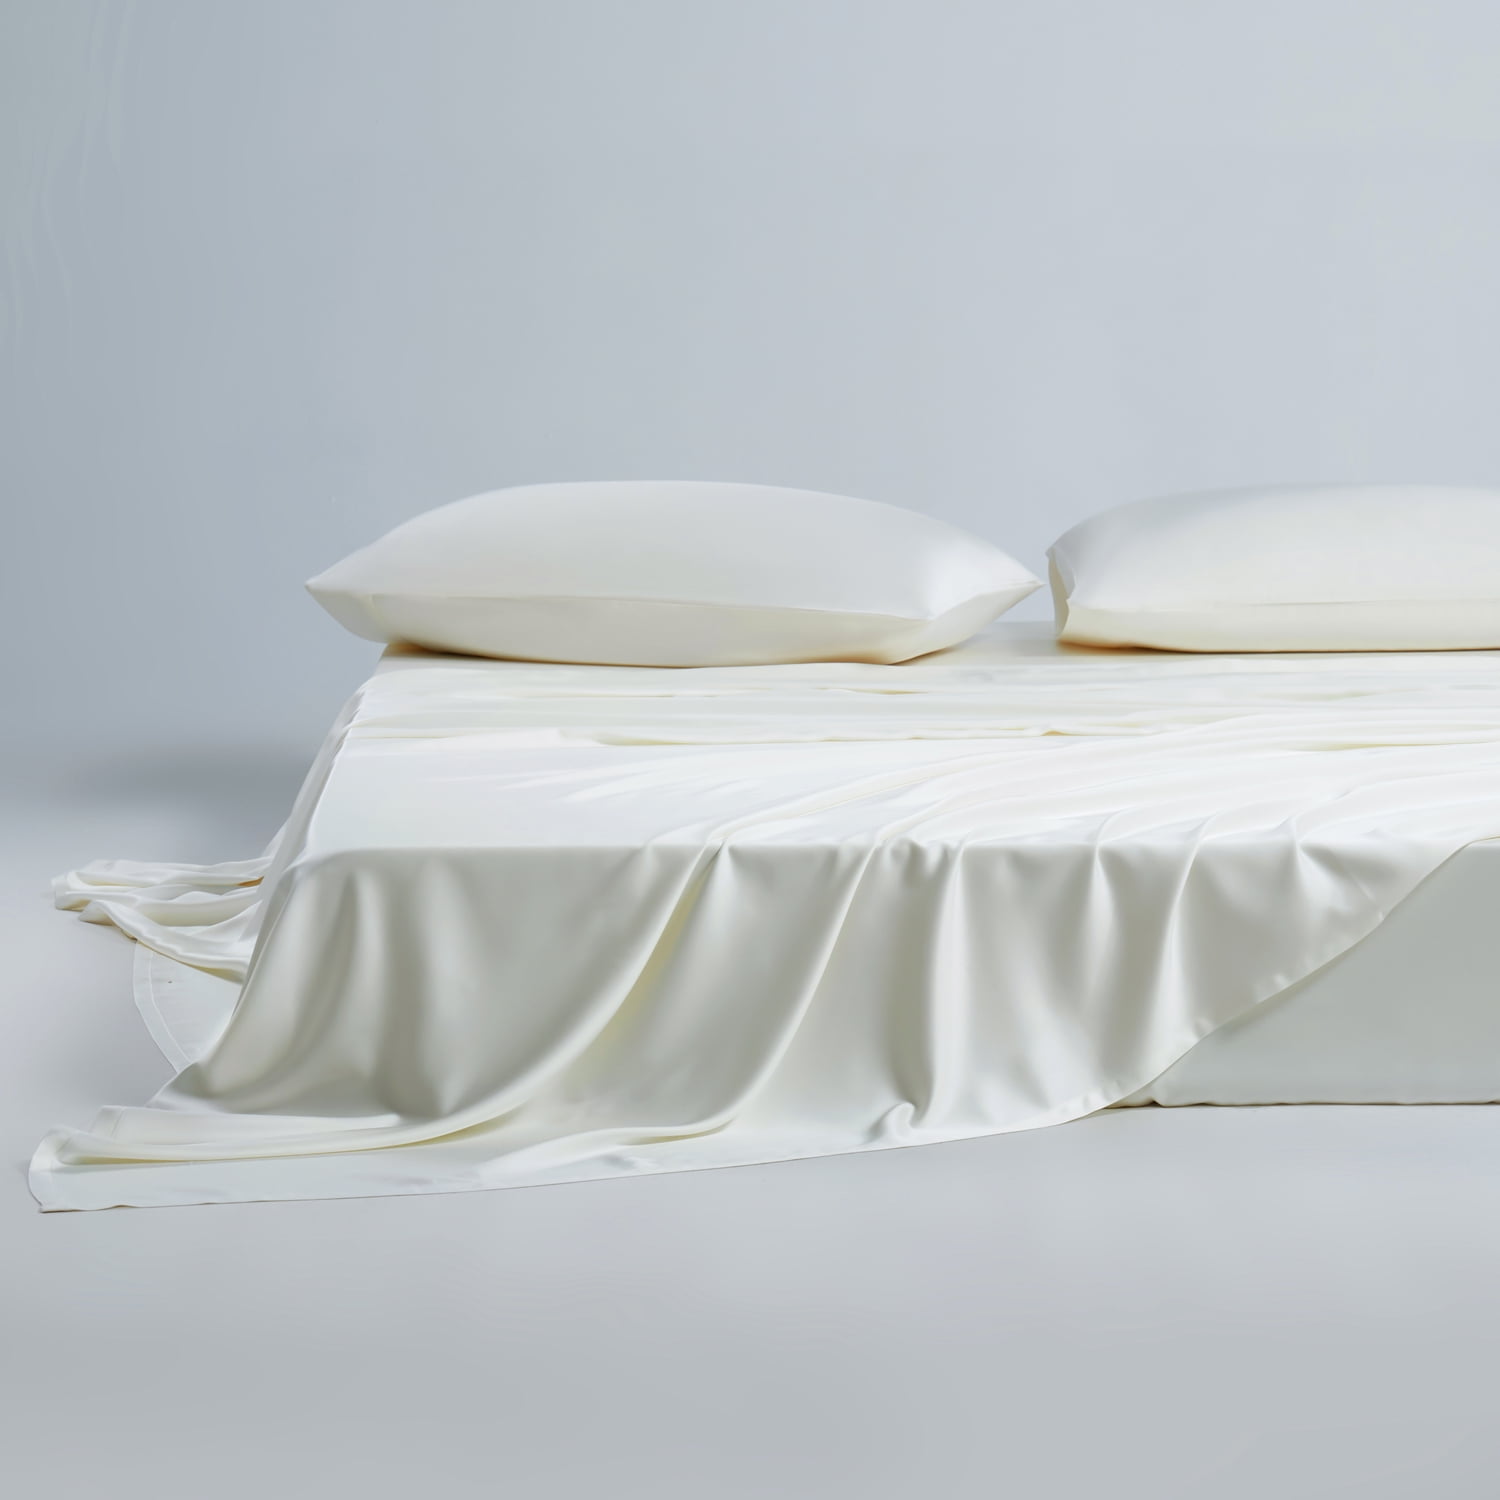 High Thread Count Cooling Sheets